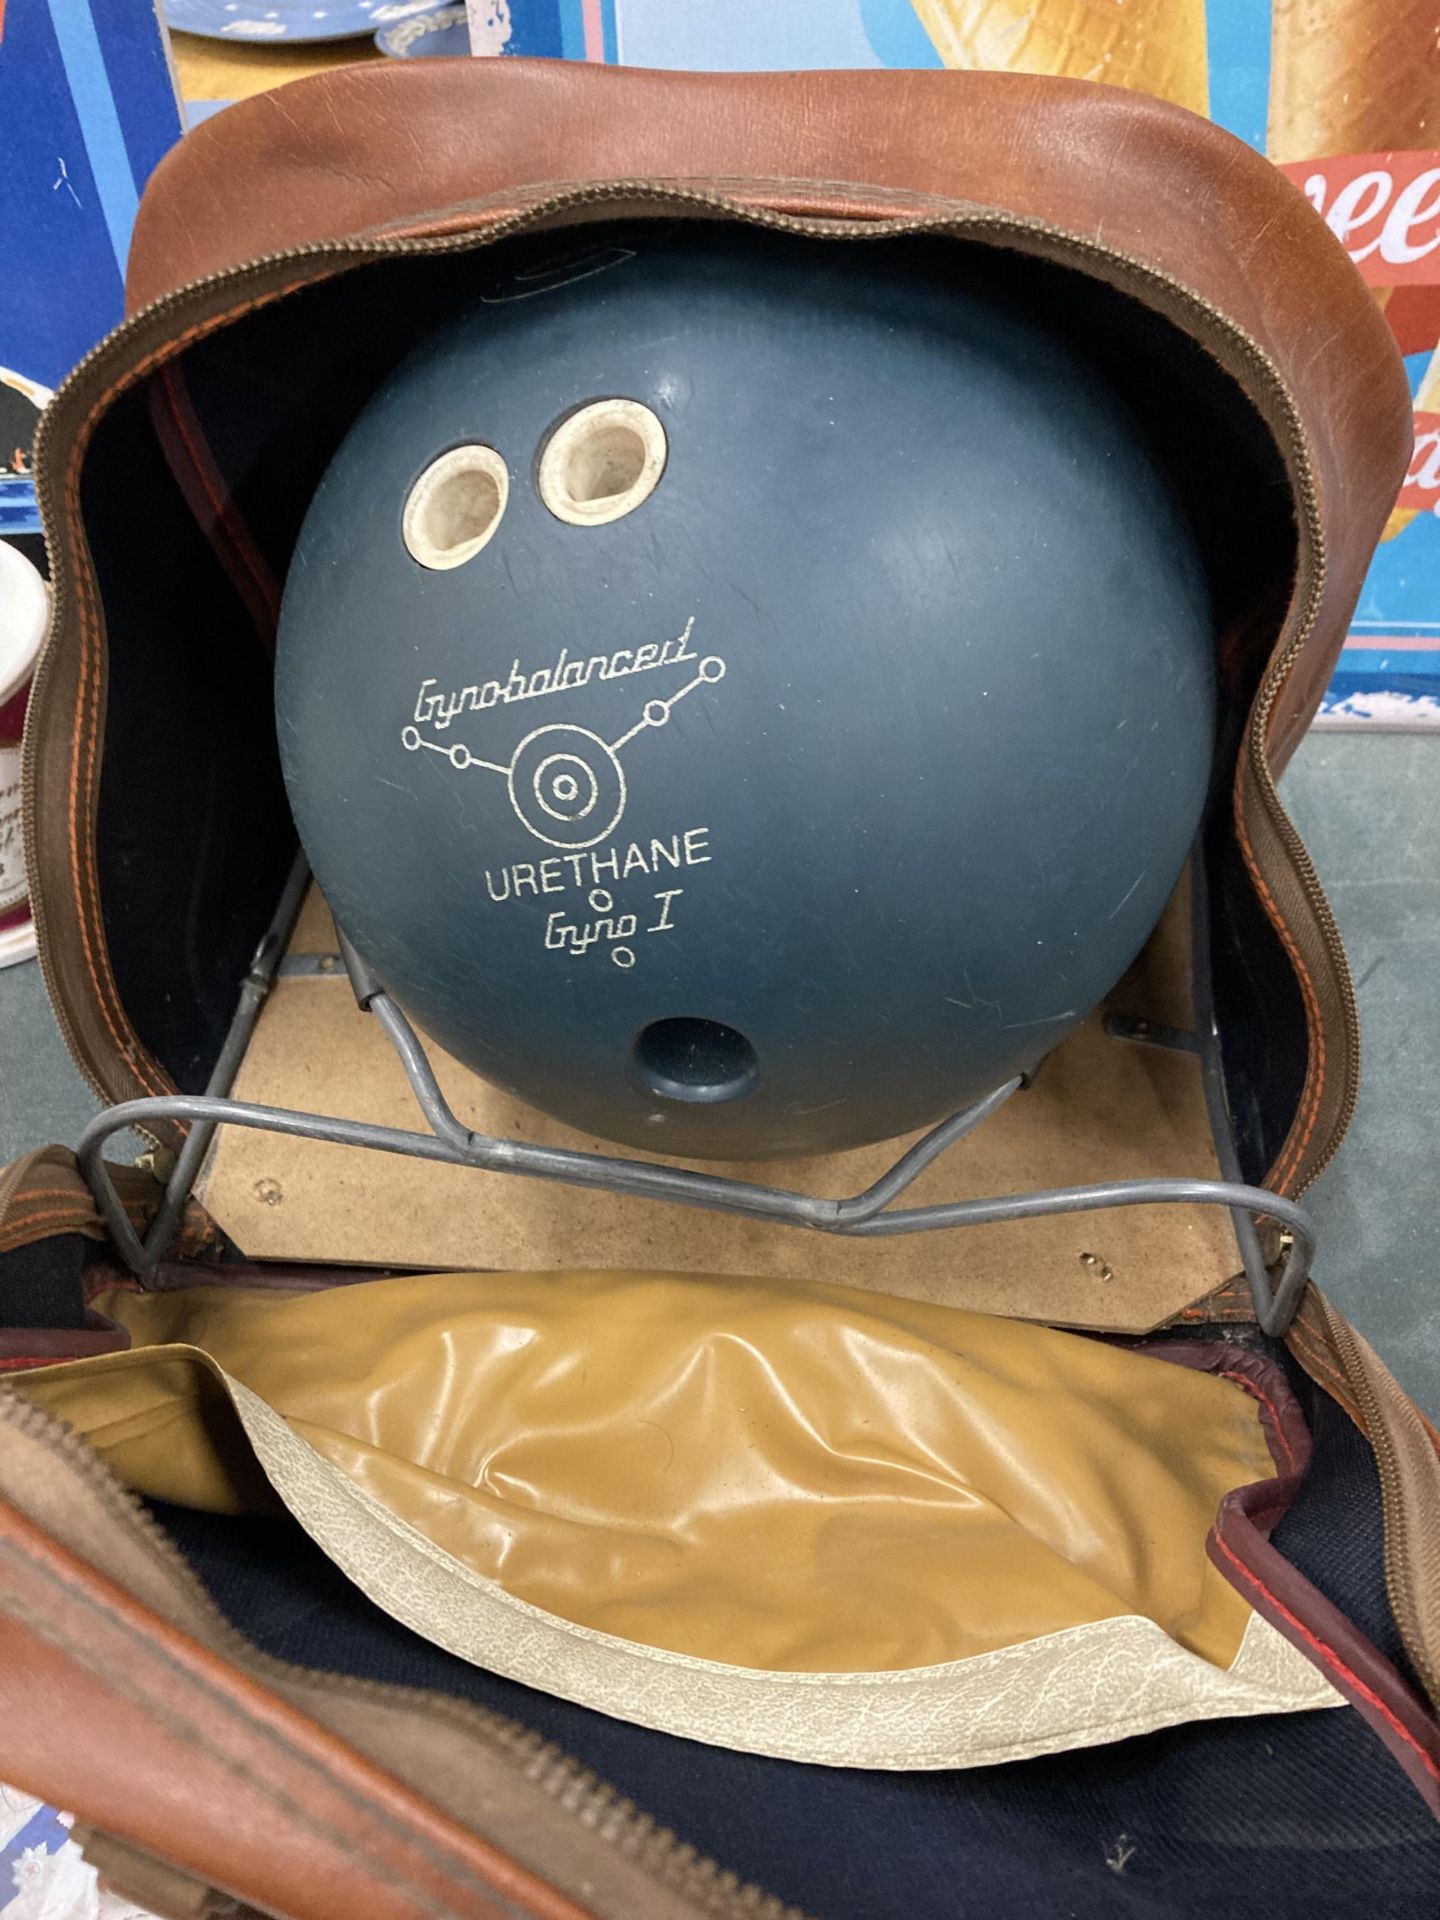 AN EBONITE GYNO - 1 TEN PIN BOWLING BOWL WITH STAND AND CASE